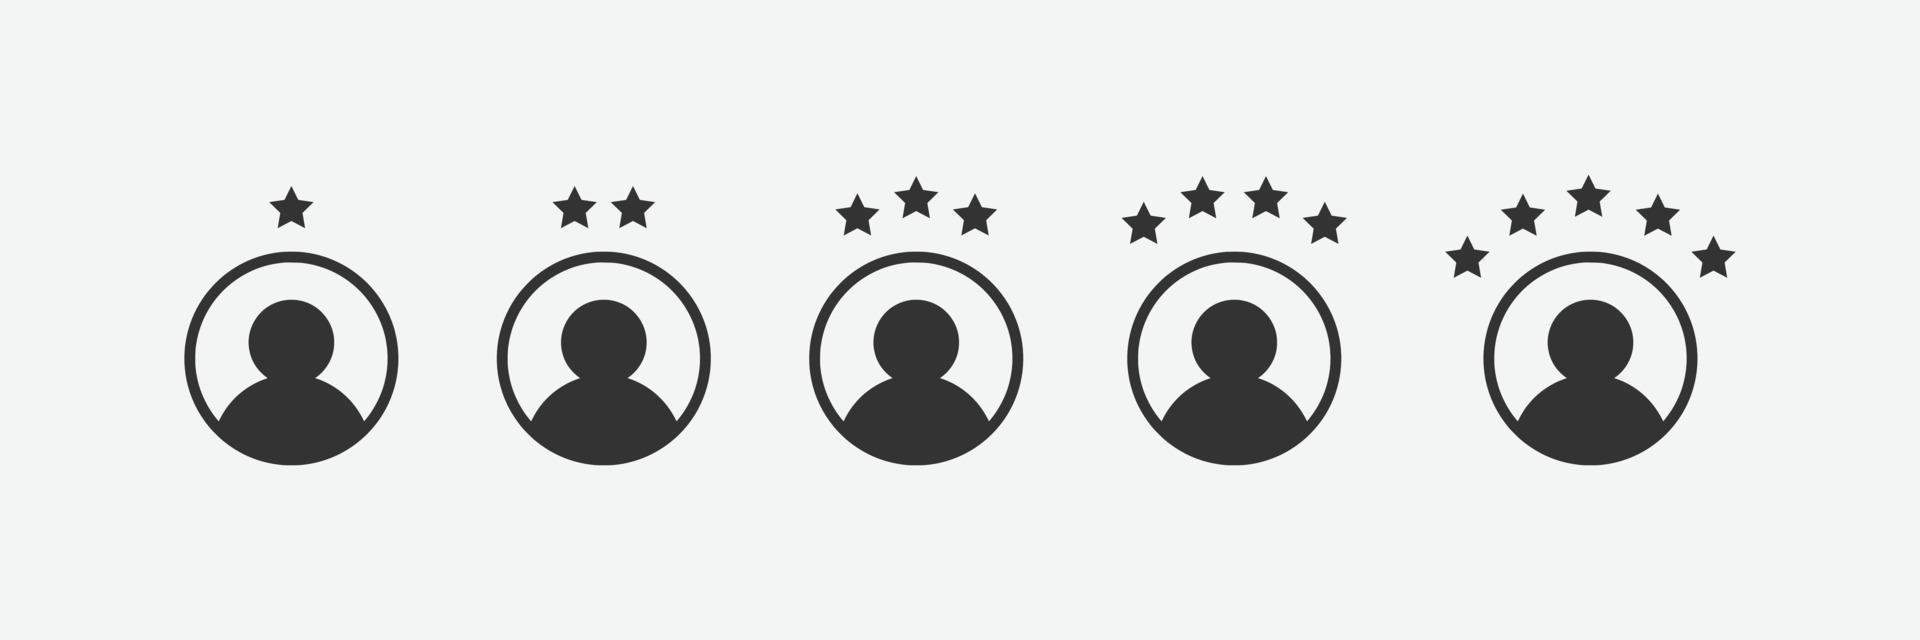 Customer experience icon. 1 to 5 star satisfaction rating icon vector symbol sign